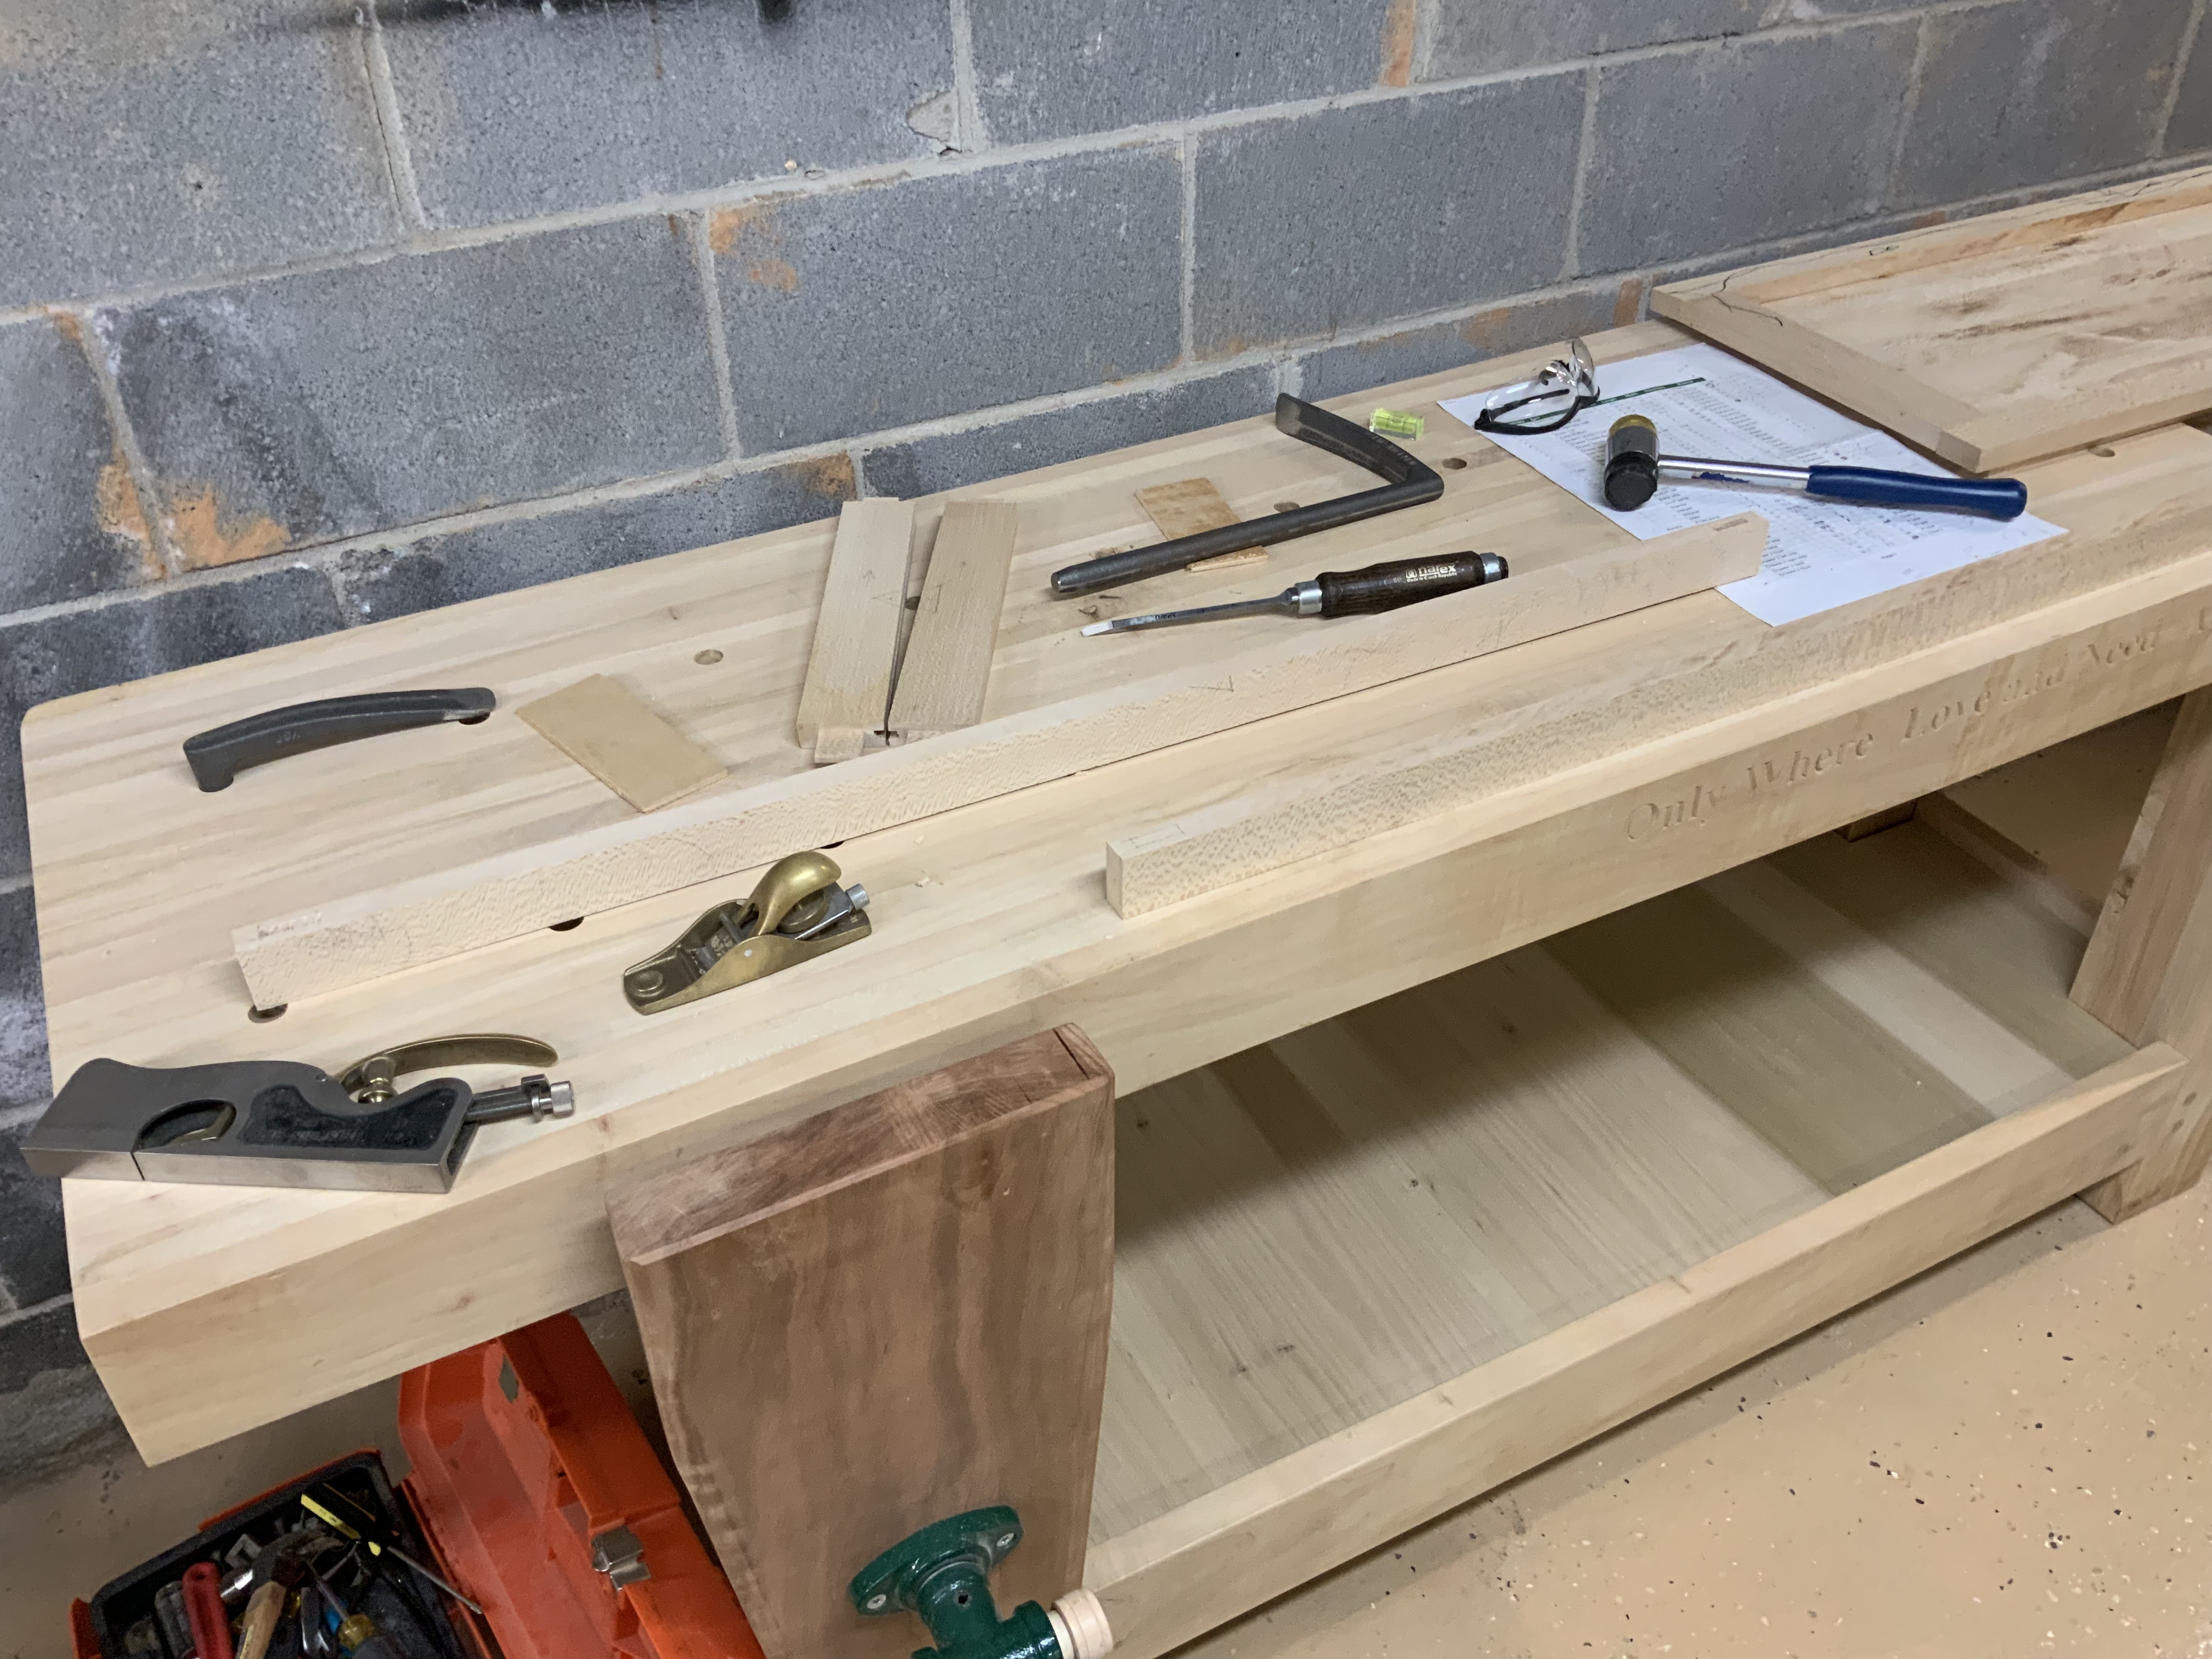 Using the new workbench, with benchdogs and mortise chisels to make the side doors